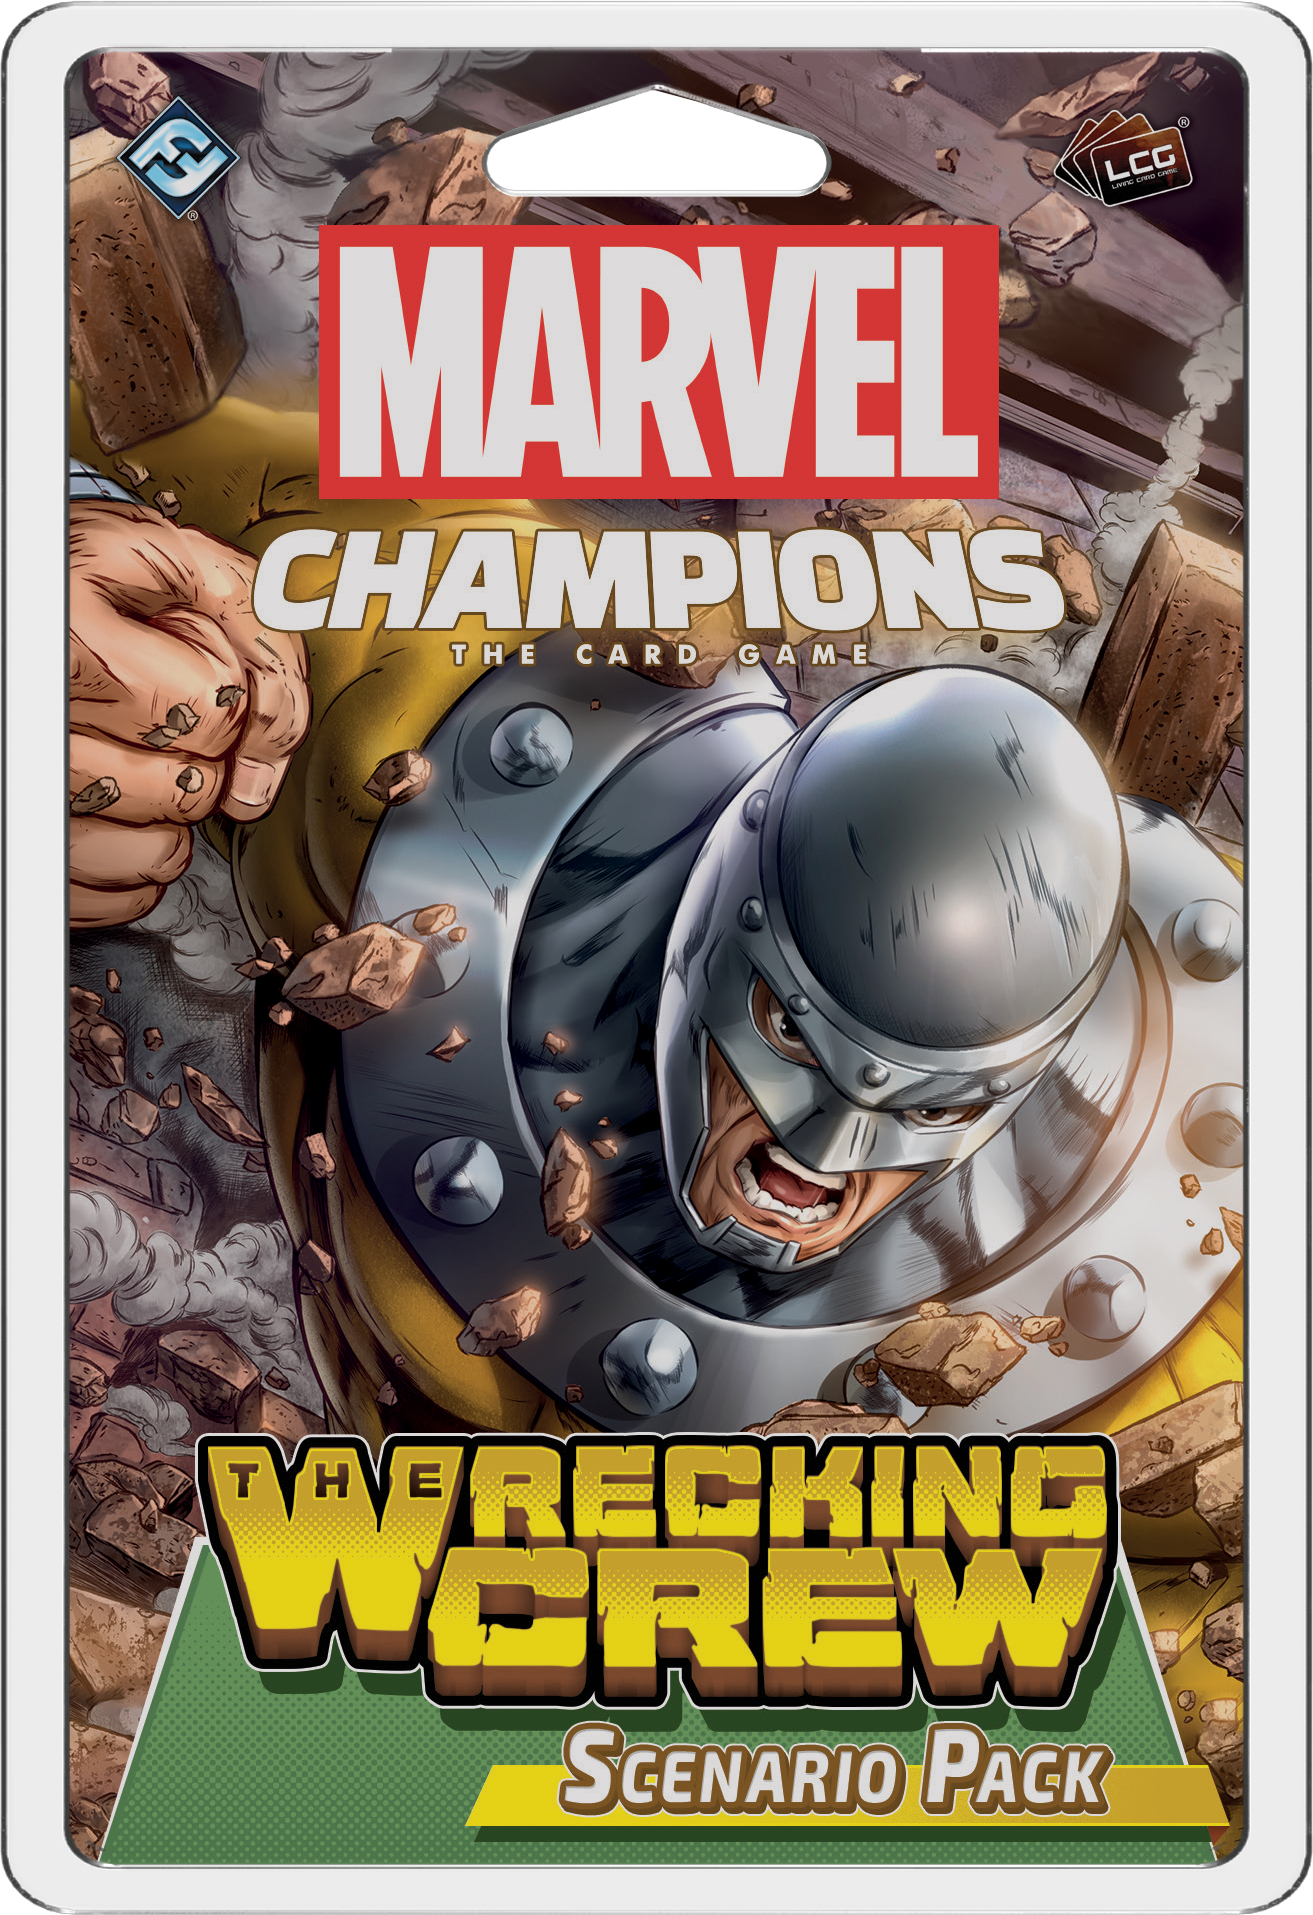 Marvel Champions The Card Game Wrecking Crew Scenario Pack | L.A. Mood Comics and Games